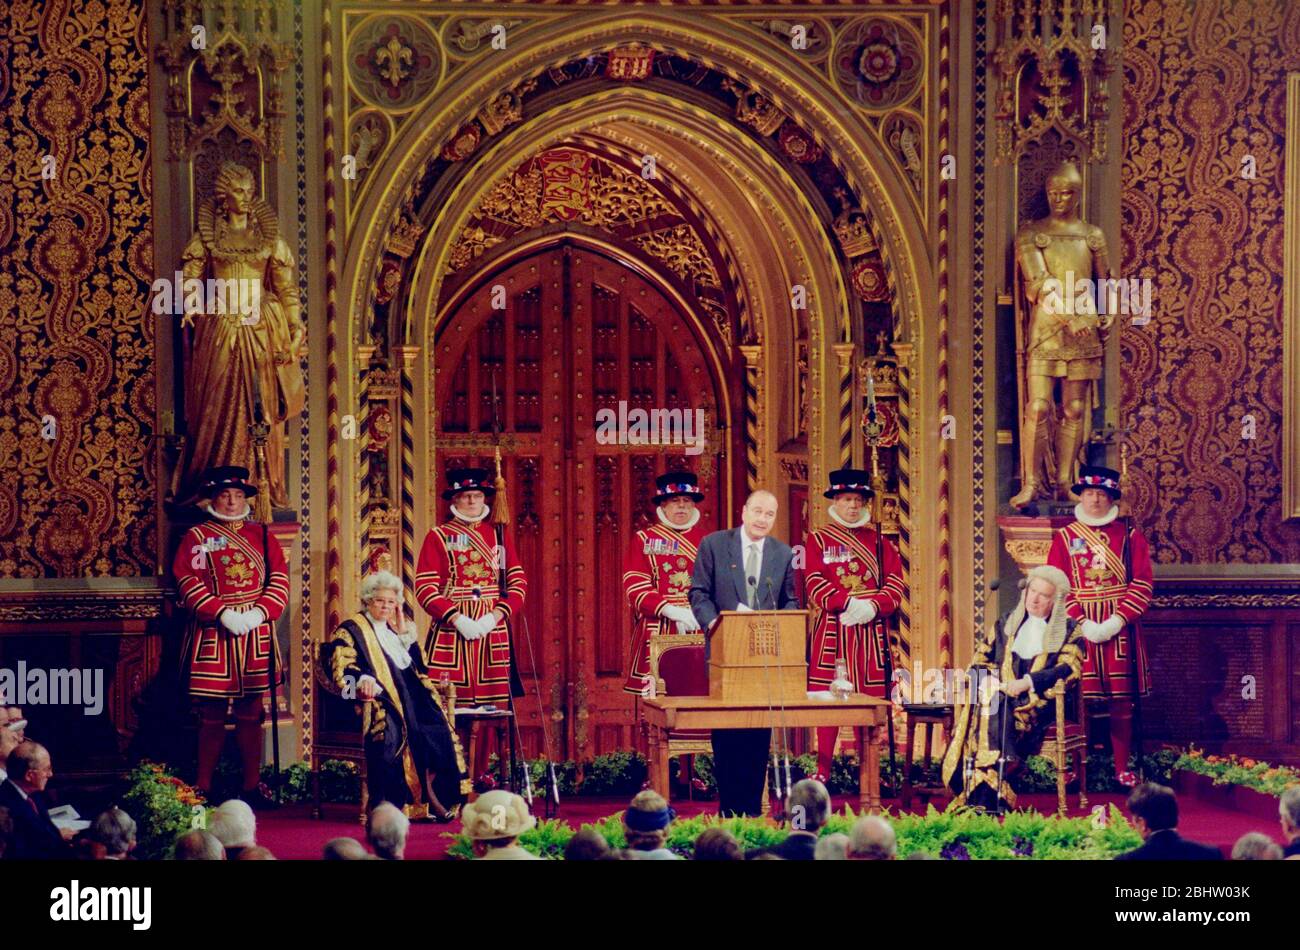 French President Jacques Chirac speaks at the Houses of Parliament, in the House of Lords, London, UK, during a state visit in 1996. Picture also shows Betty Boothroyd, Speaker of the House of Commons. Stock Photo